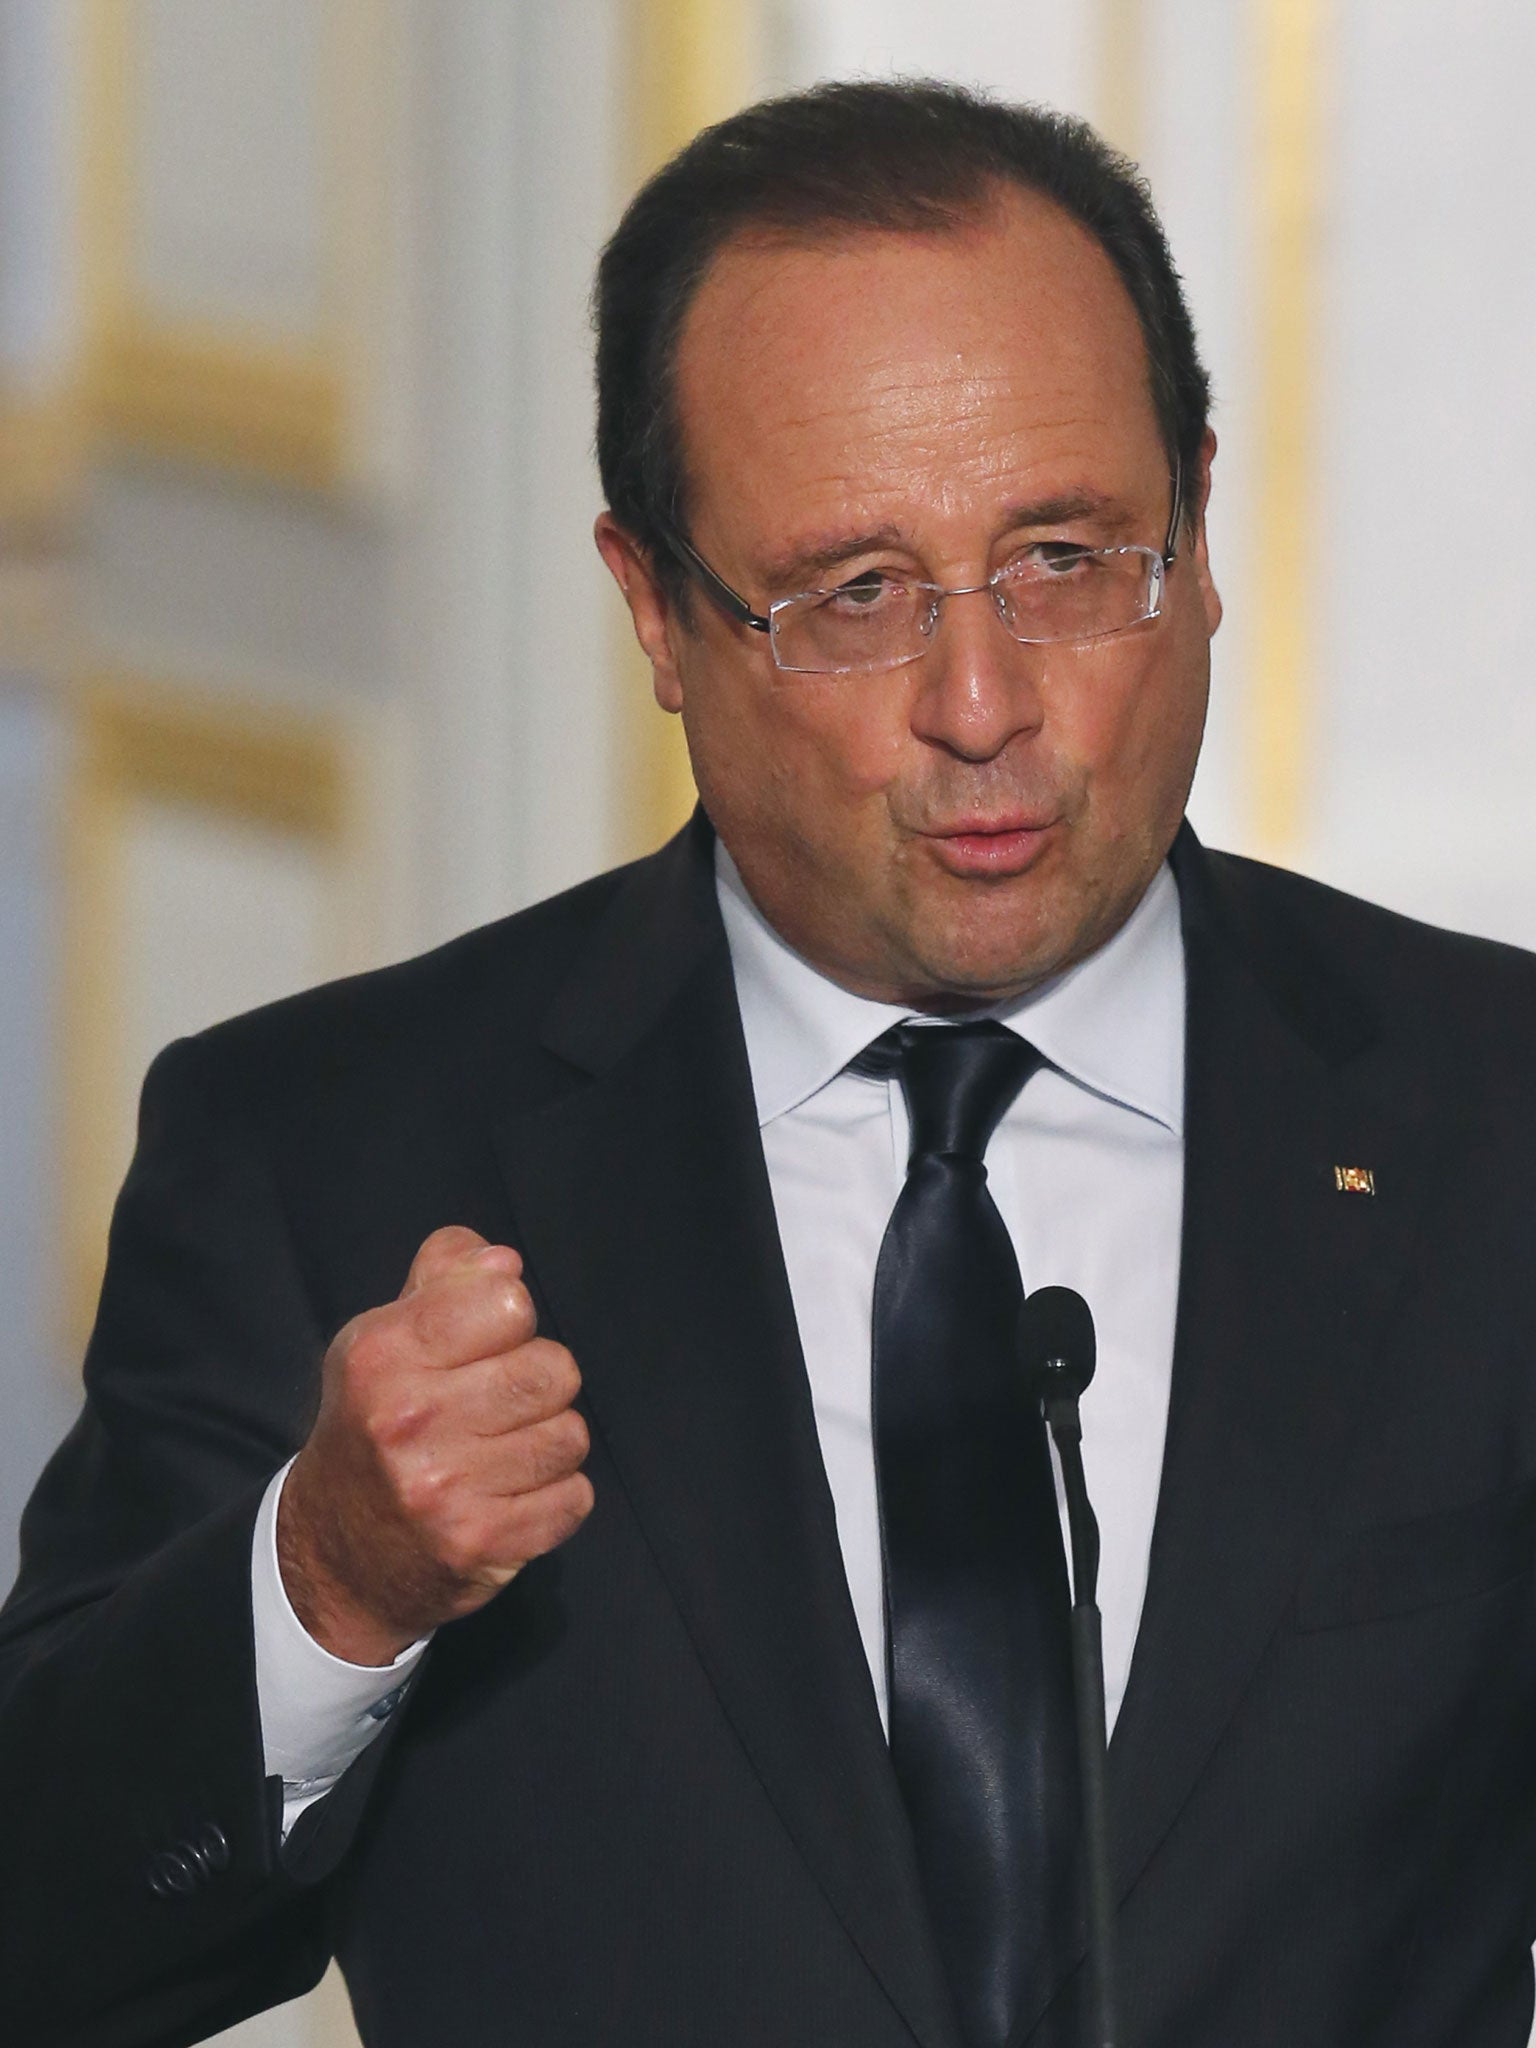 Hollande: 'Reading the interview only increased my determination'